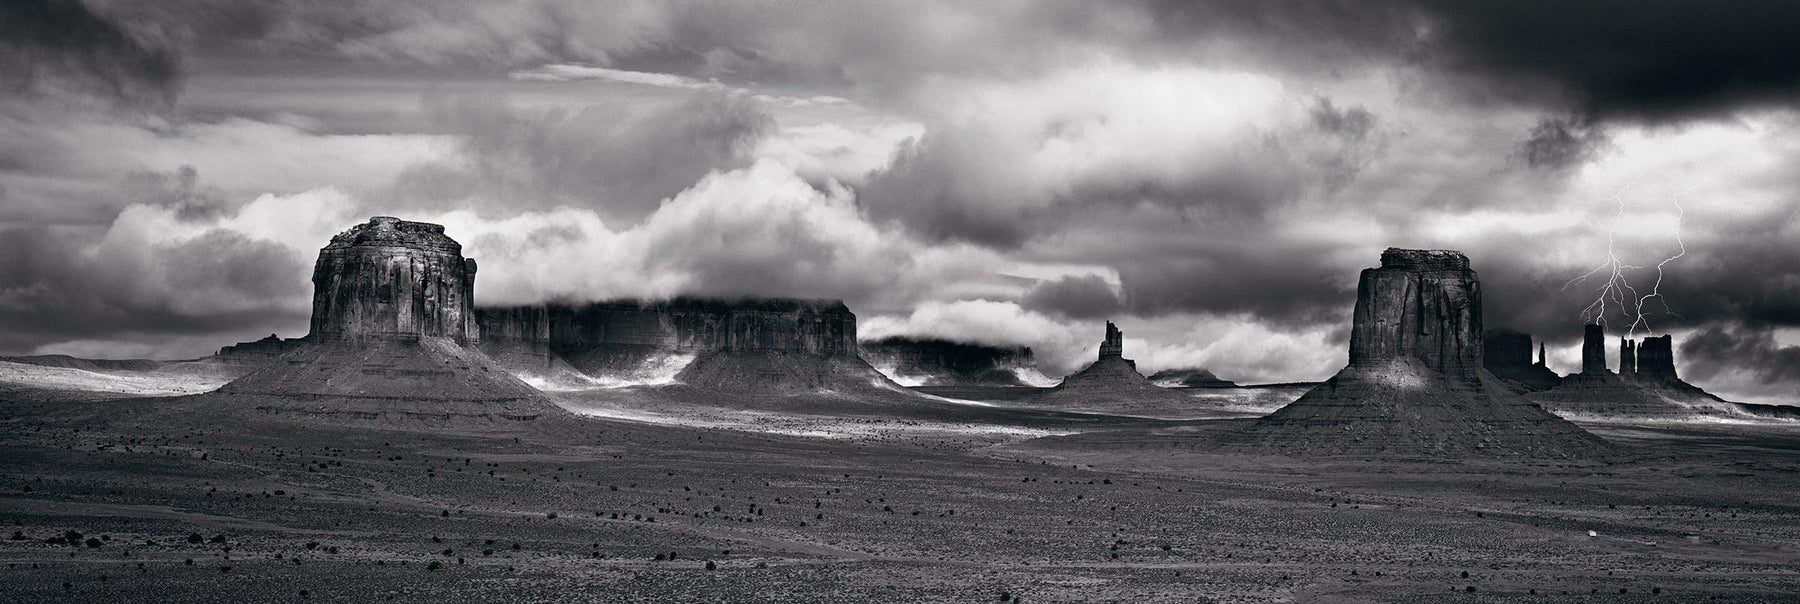 Cloud covered stone buttes of Monument Valley Arizona during a thunder storm